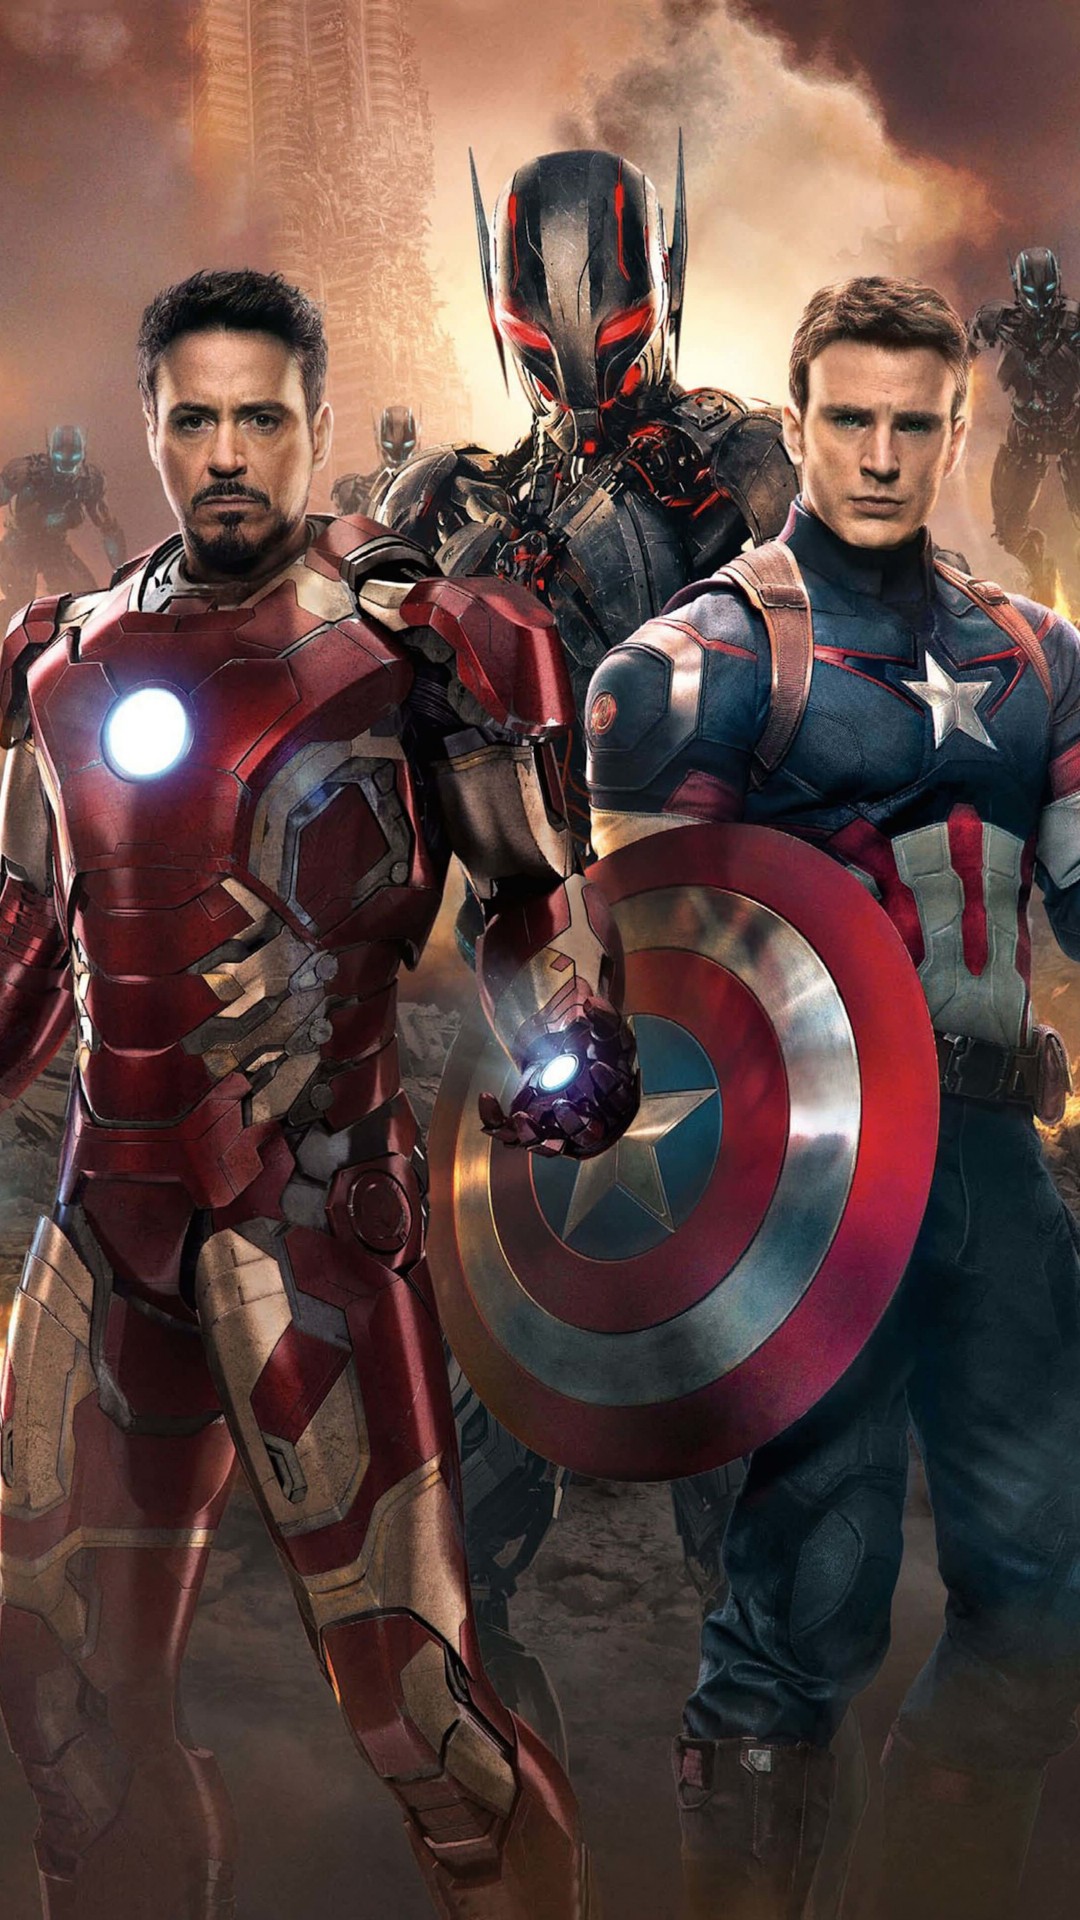 The Avengers: Age of Ultron - Iron Man and Captain America Wallpaper for SONY Xperia Z2